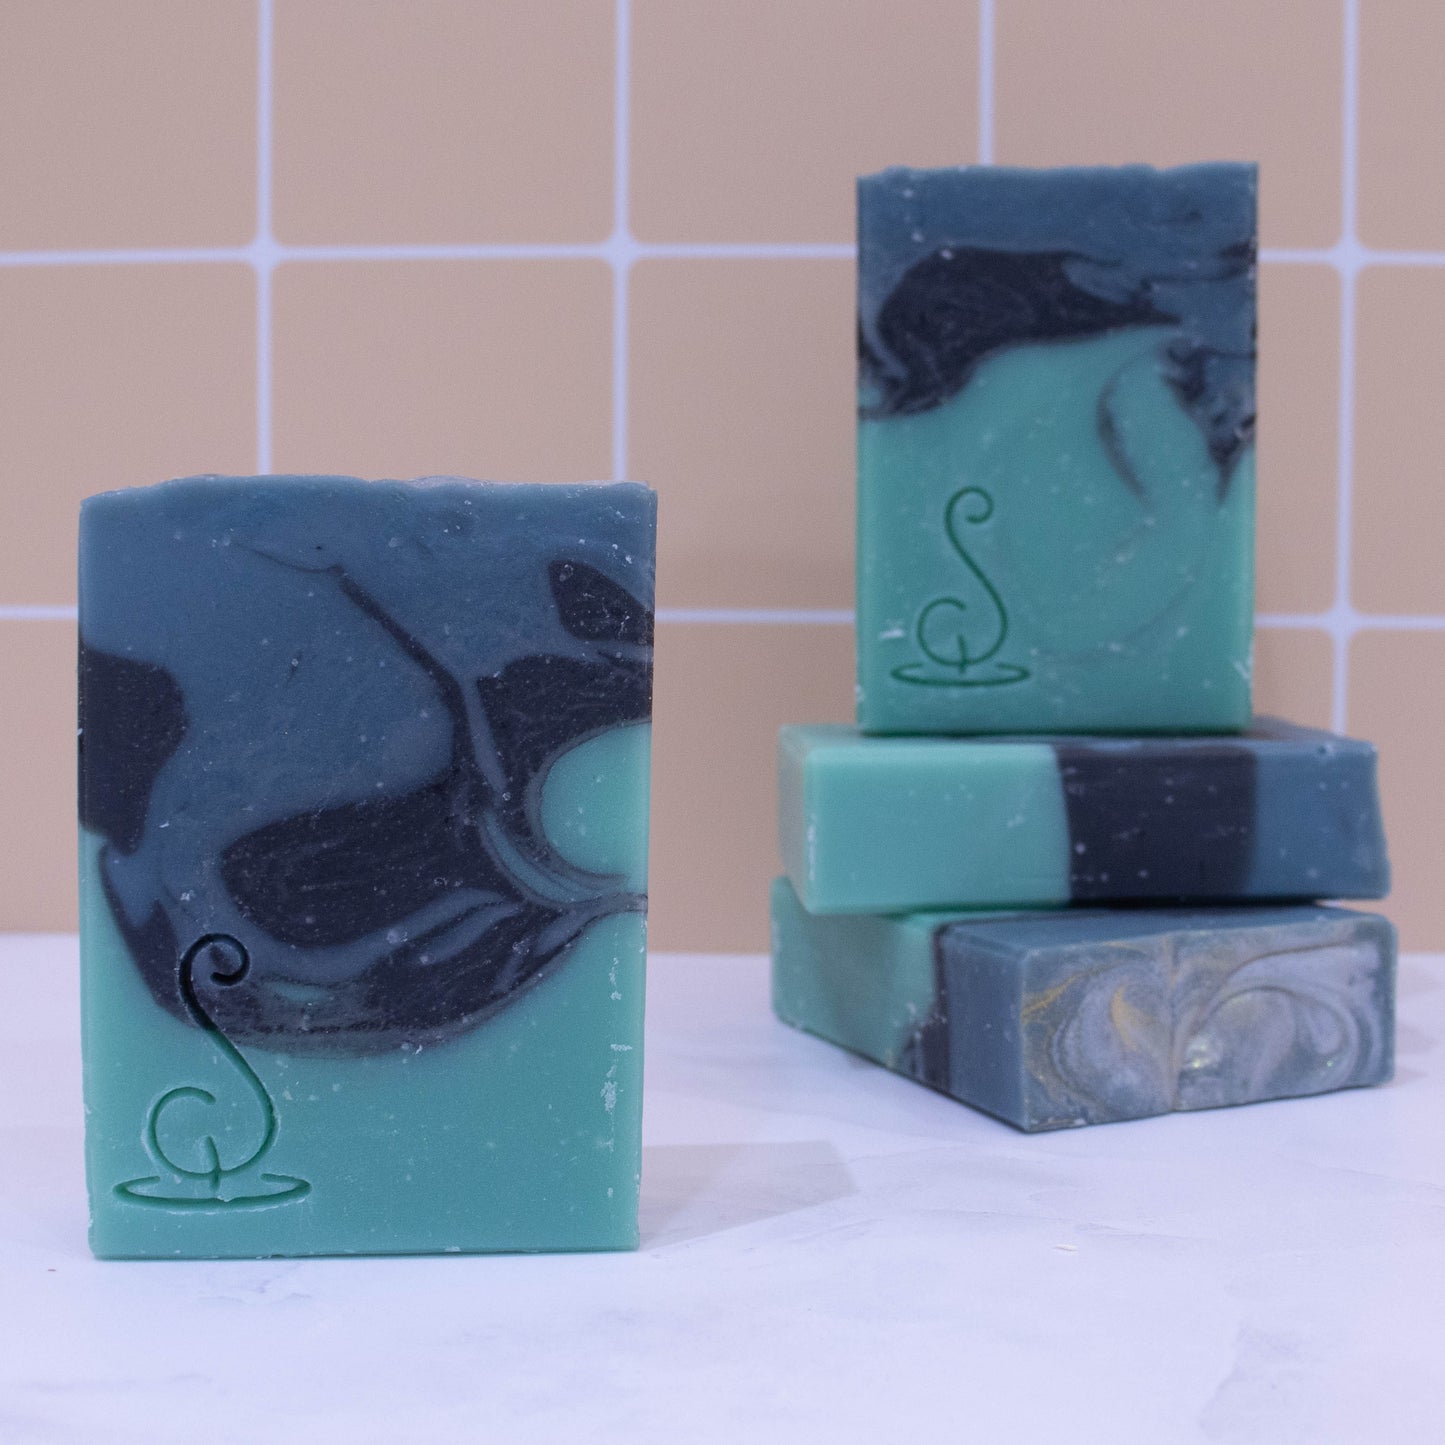 Four rectangular bars of soap sit on a marble bench each showing various design patterns from the same batch of soap. The soaps have three layers of colour; a sea green base, black centre and teal at the top, which have been swirled together to look like a rolling wave.  All soaps have a similar pattern but all have slight differences